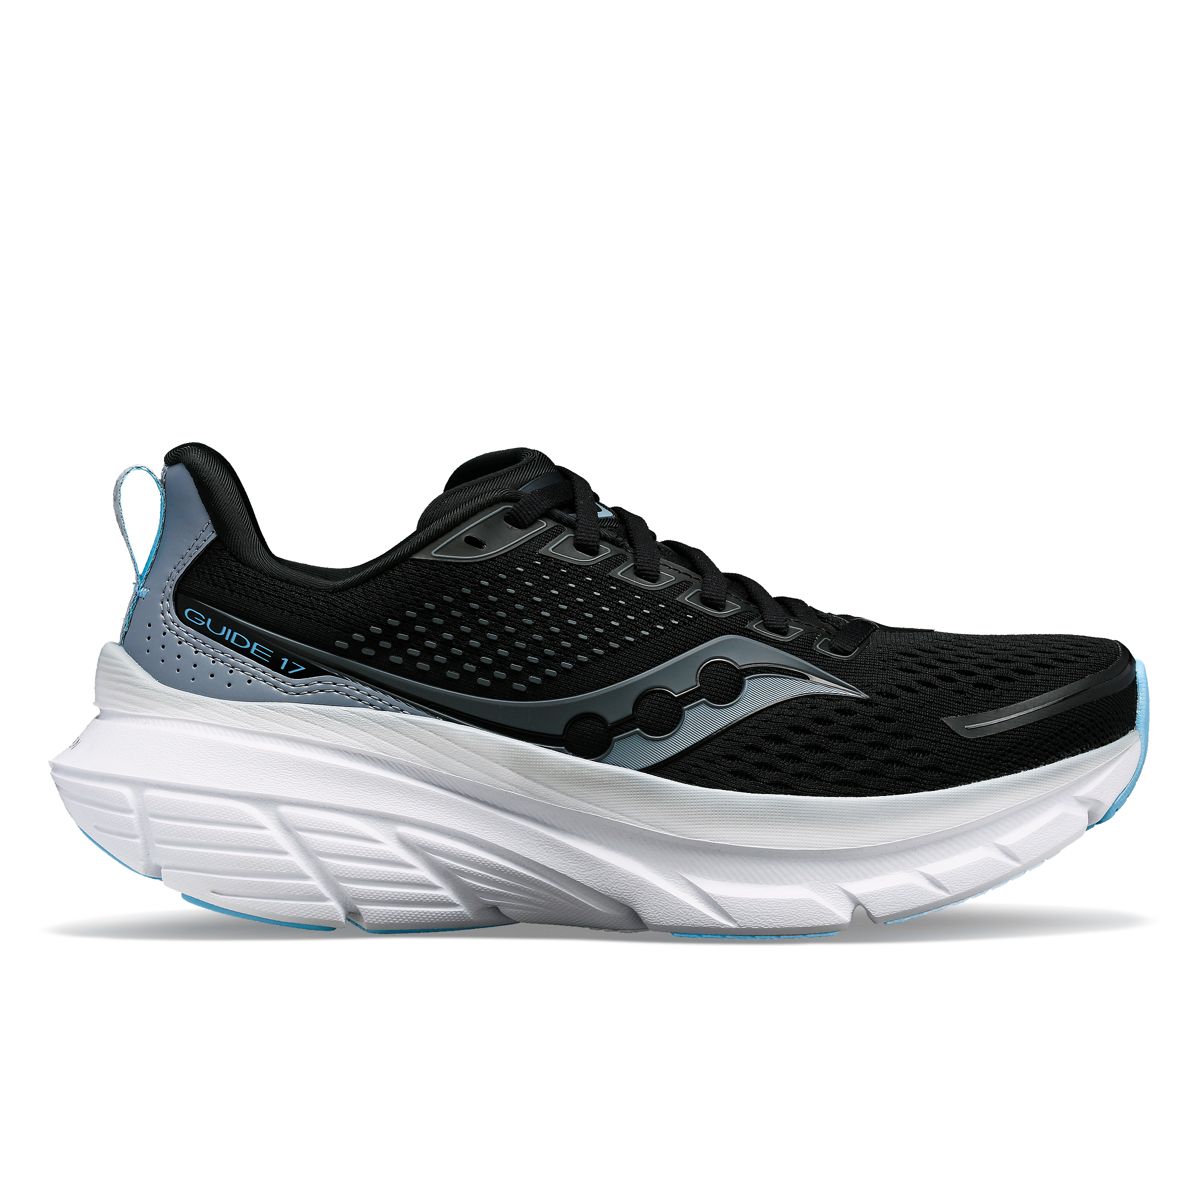 Women's Guide 17 Running Shoes - Wide | Saucony